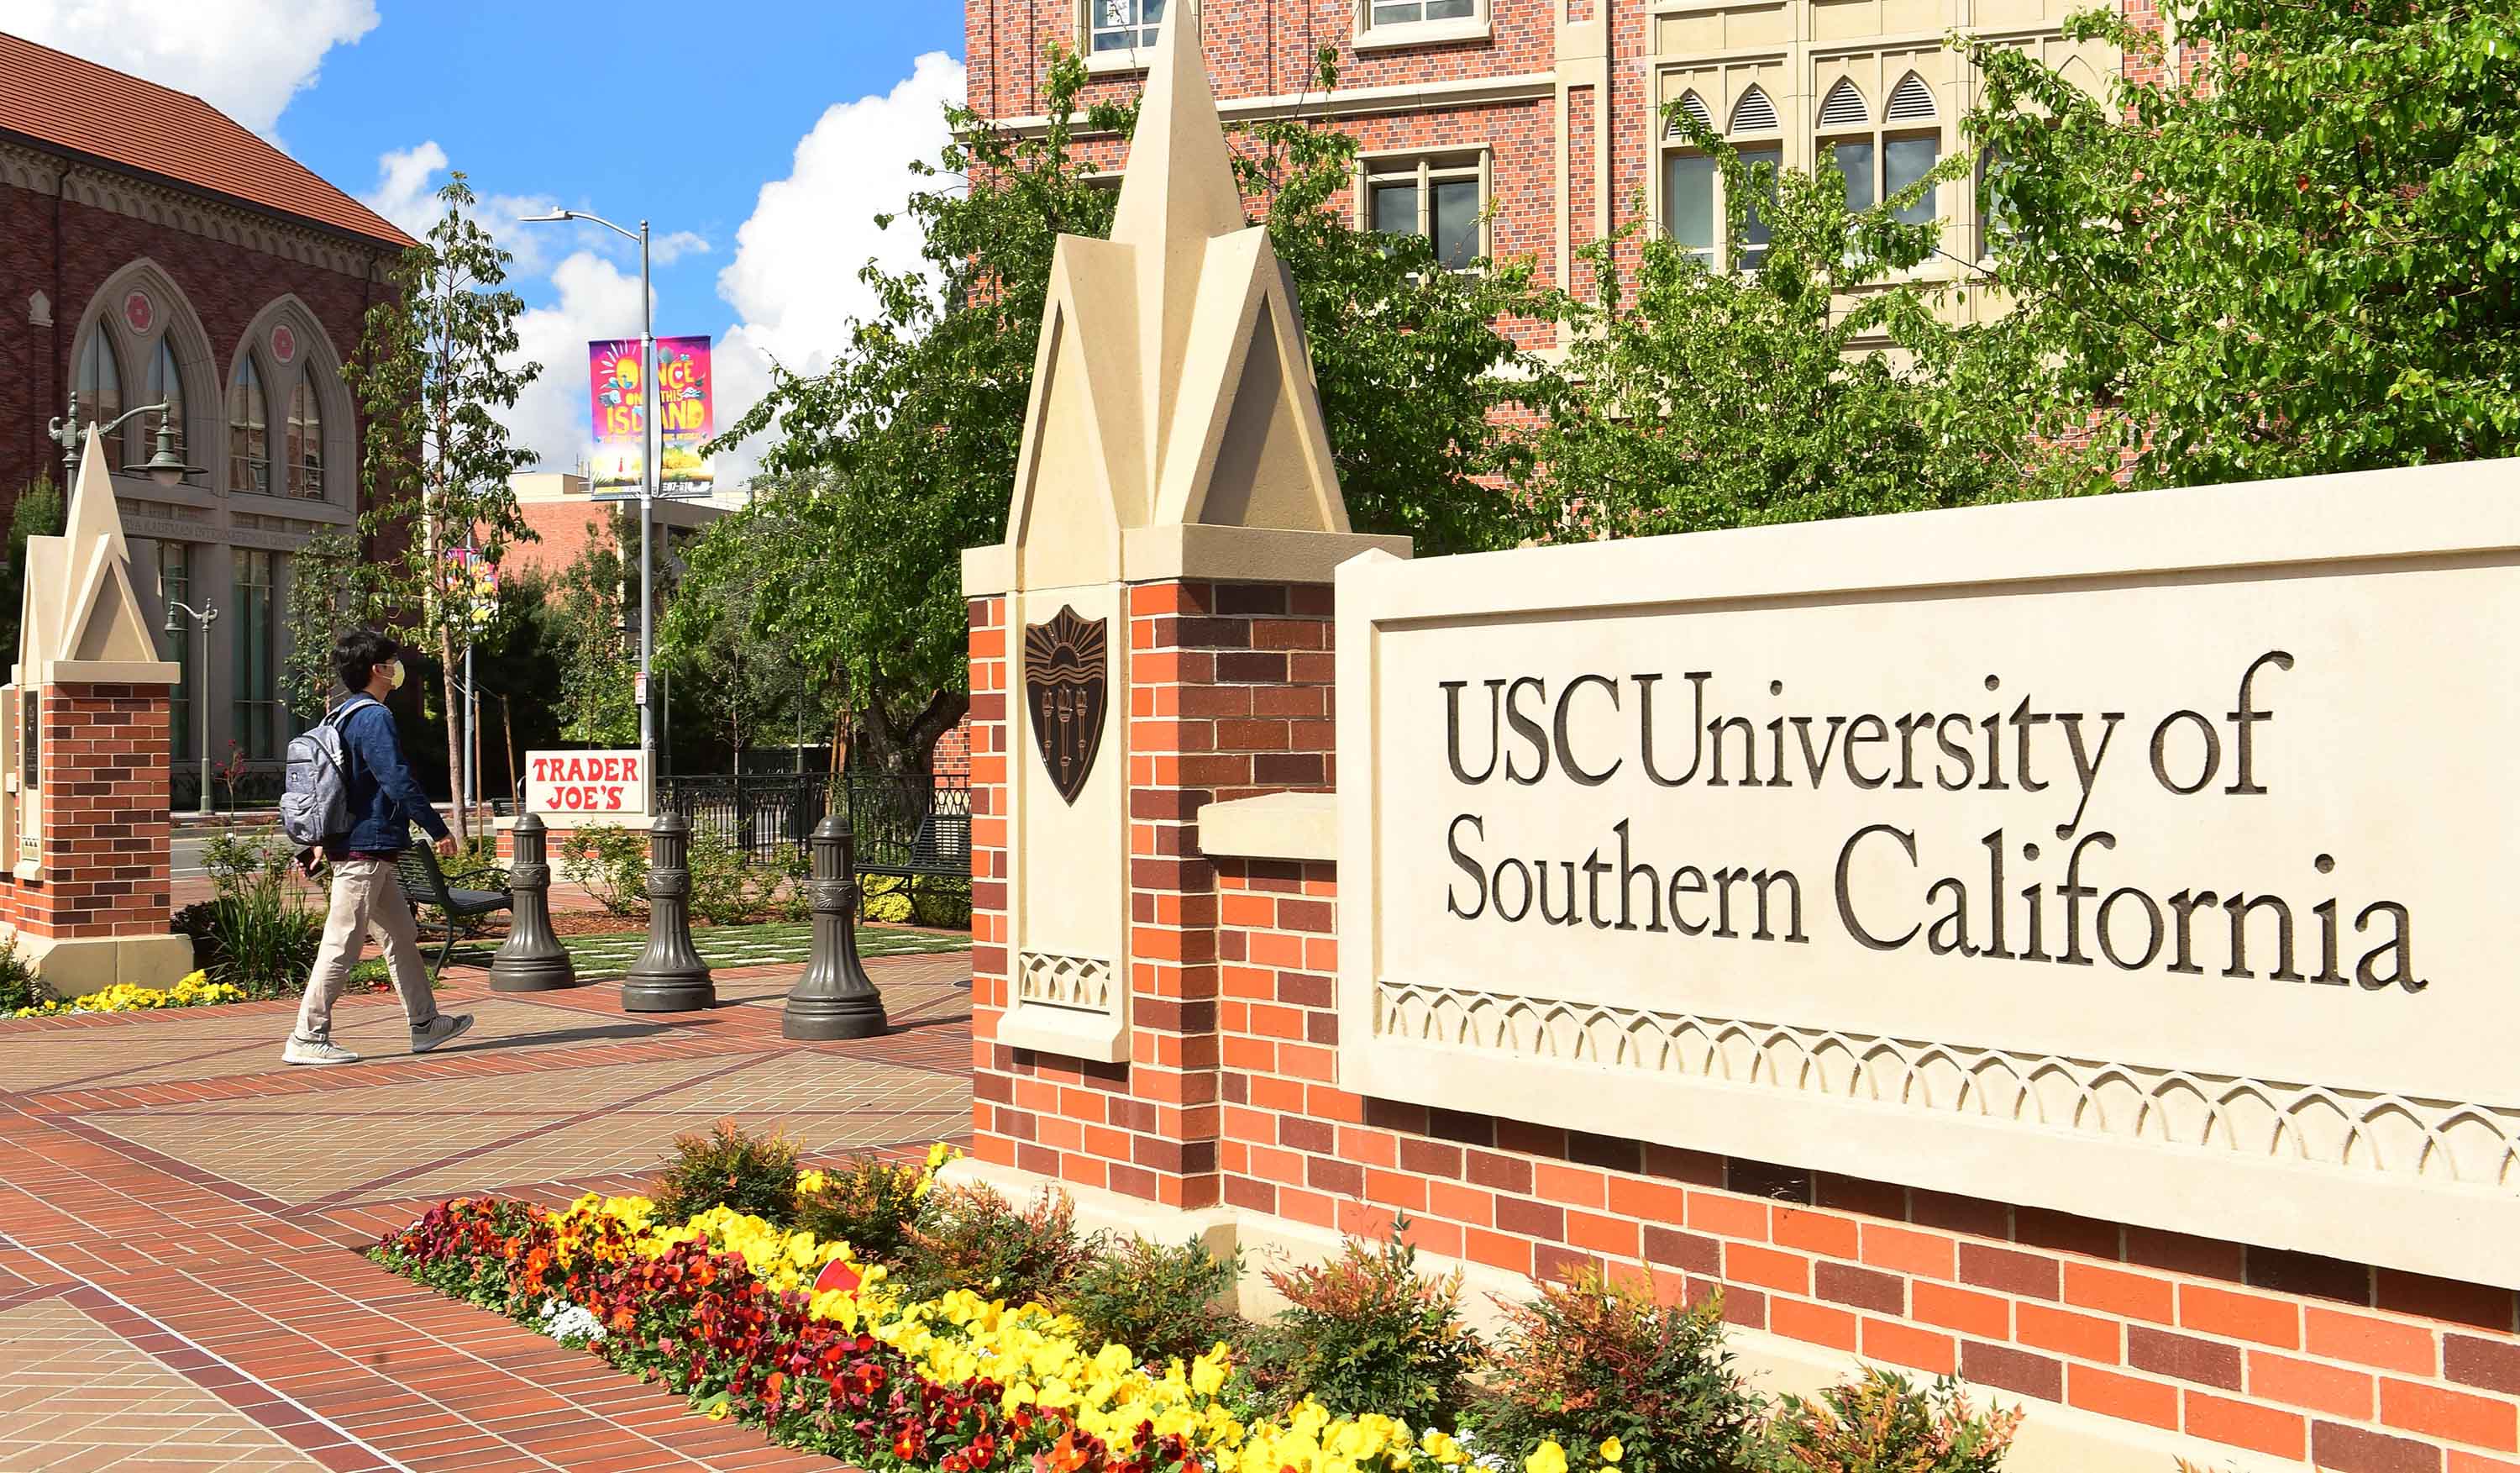 A student wears a face mask at the University of Southern California (USC) in Los Angeles, California on March 11.